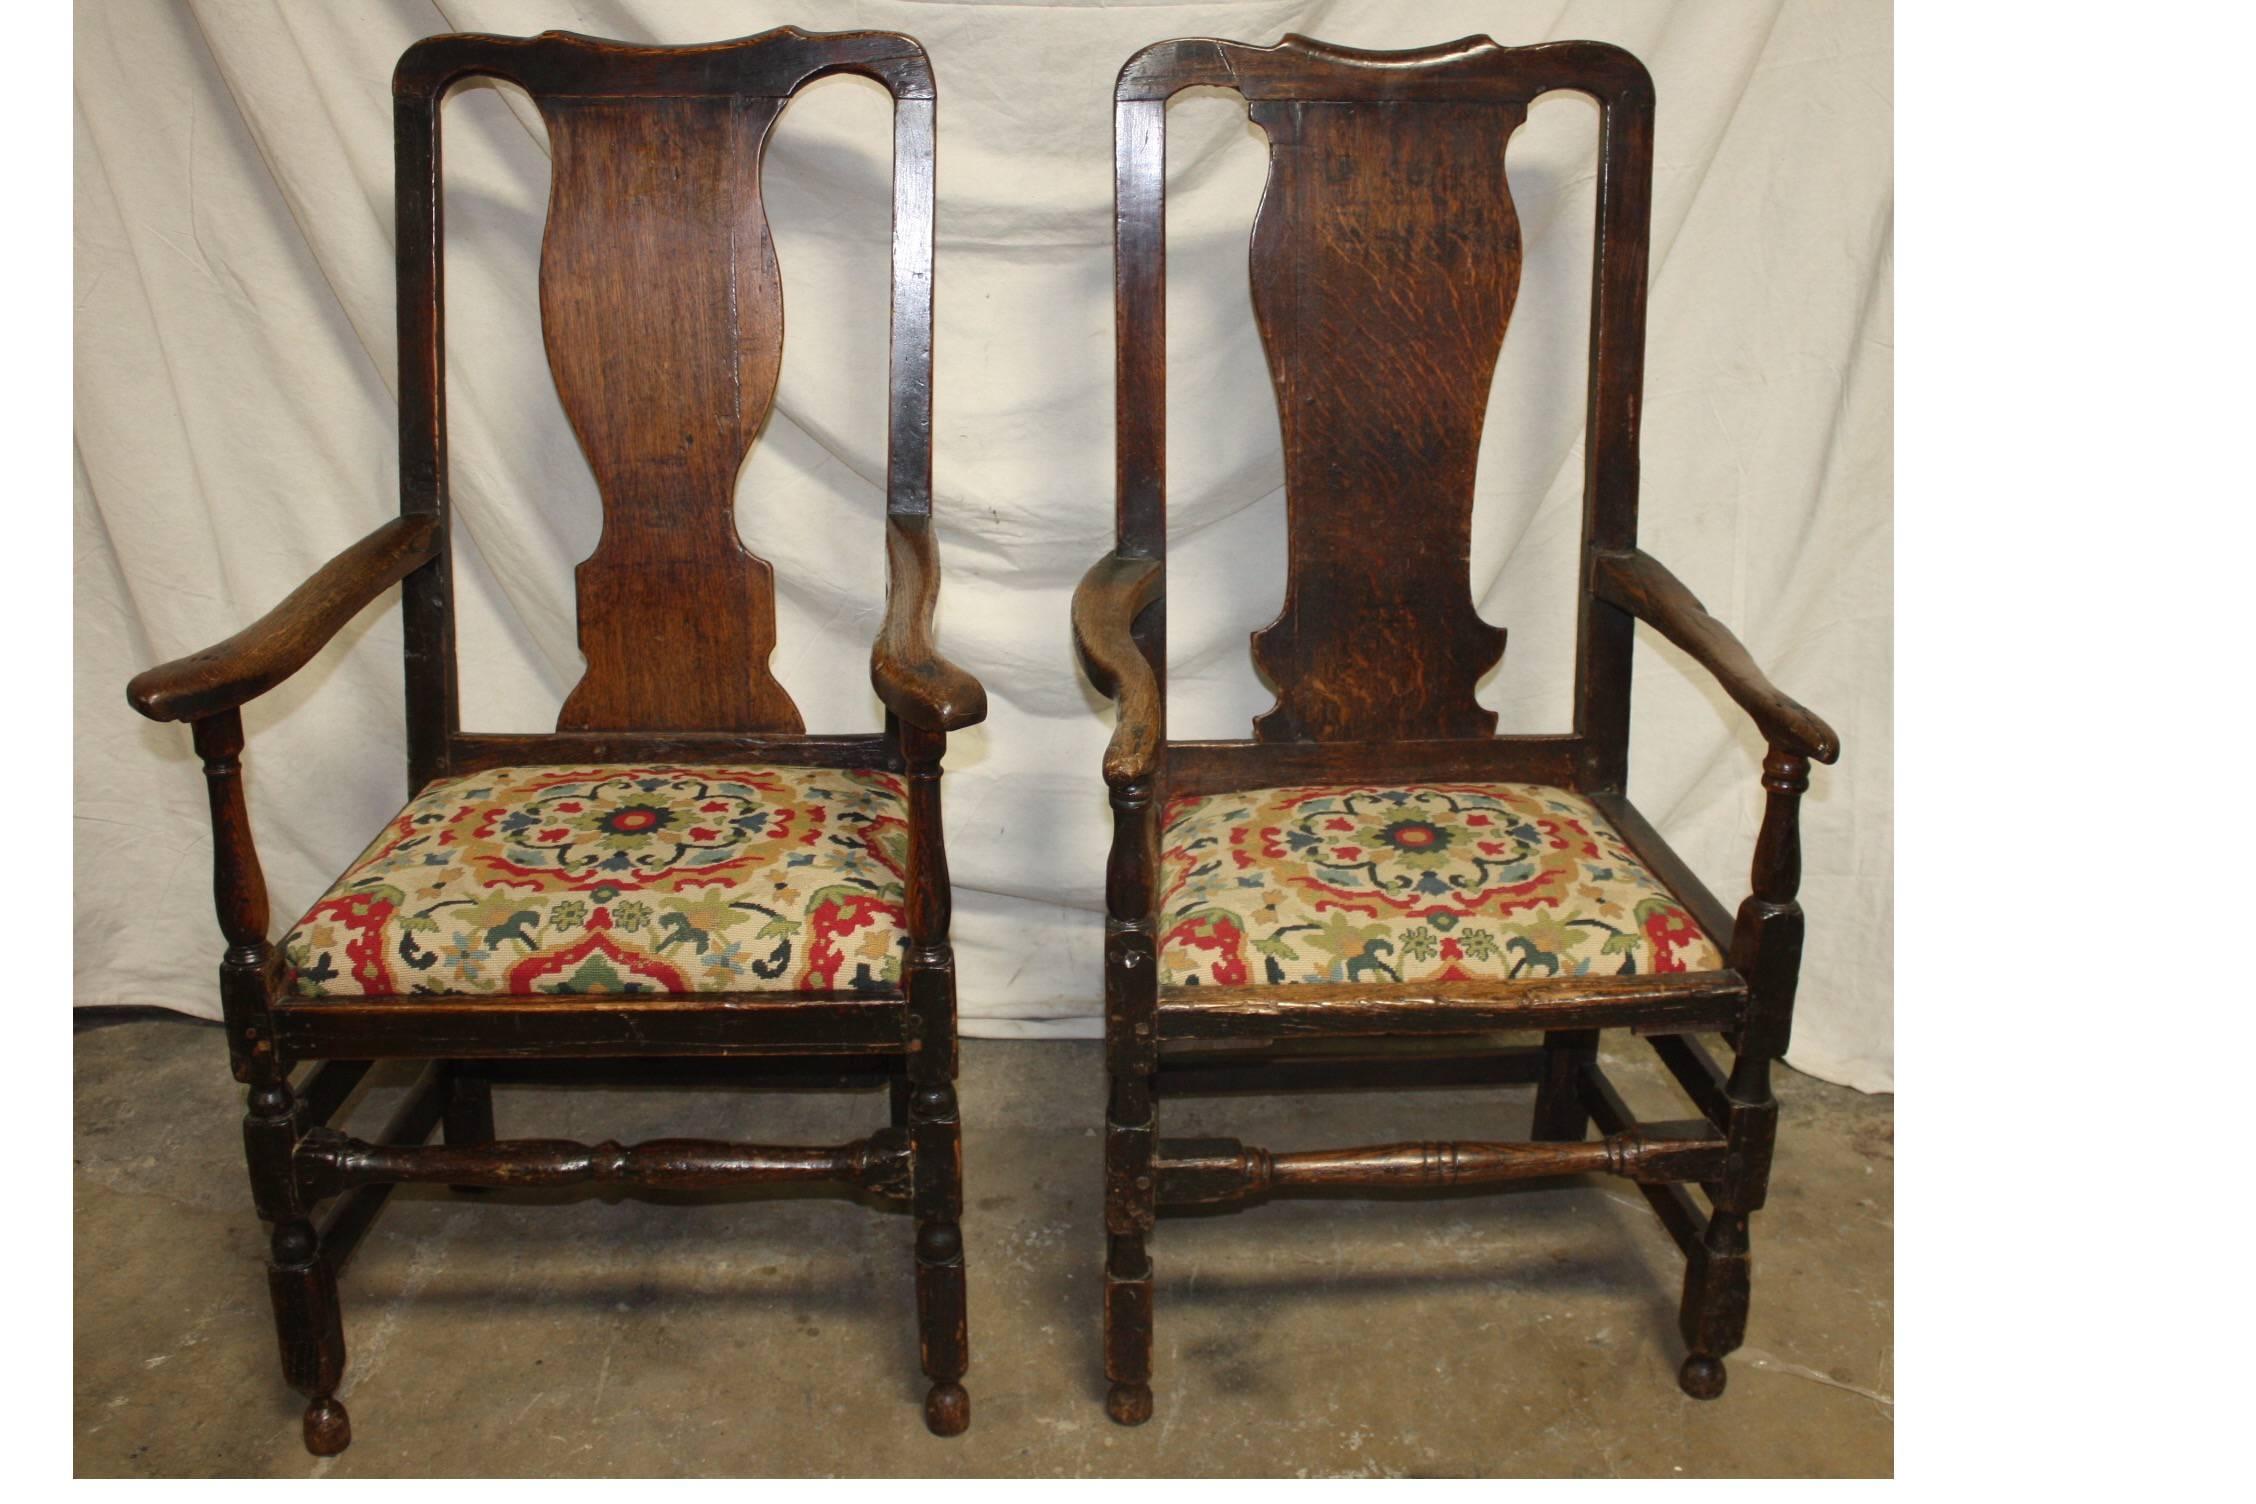 Magnificent pair of 17th century armchairs with a needle point seat cover.